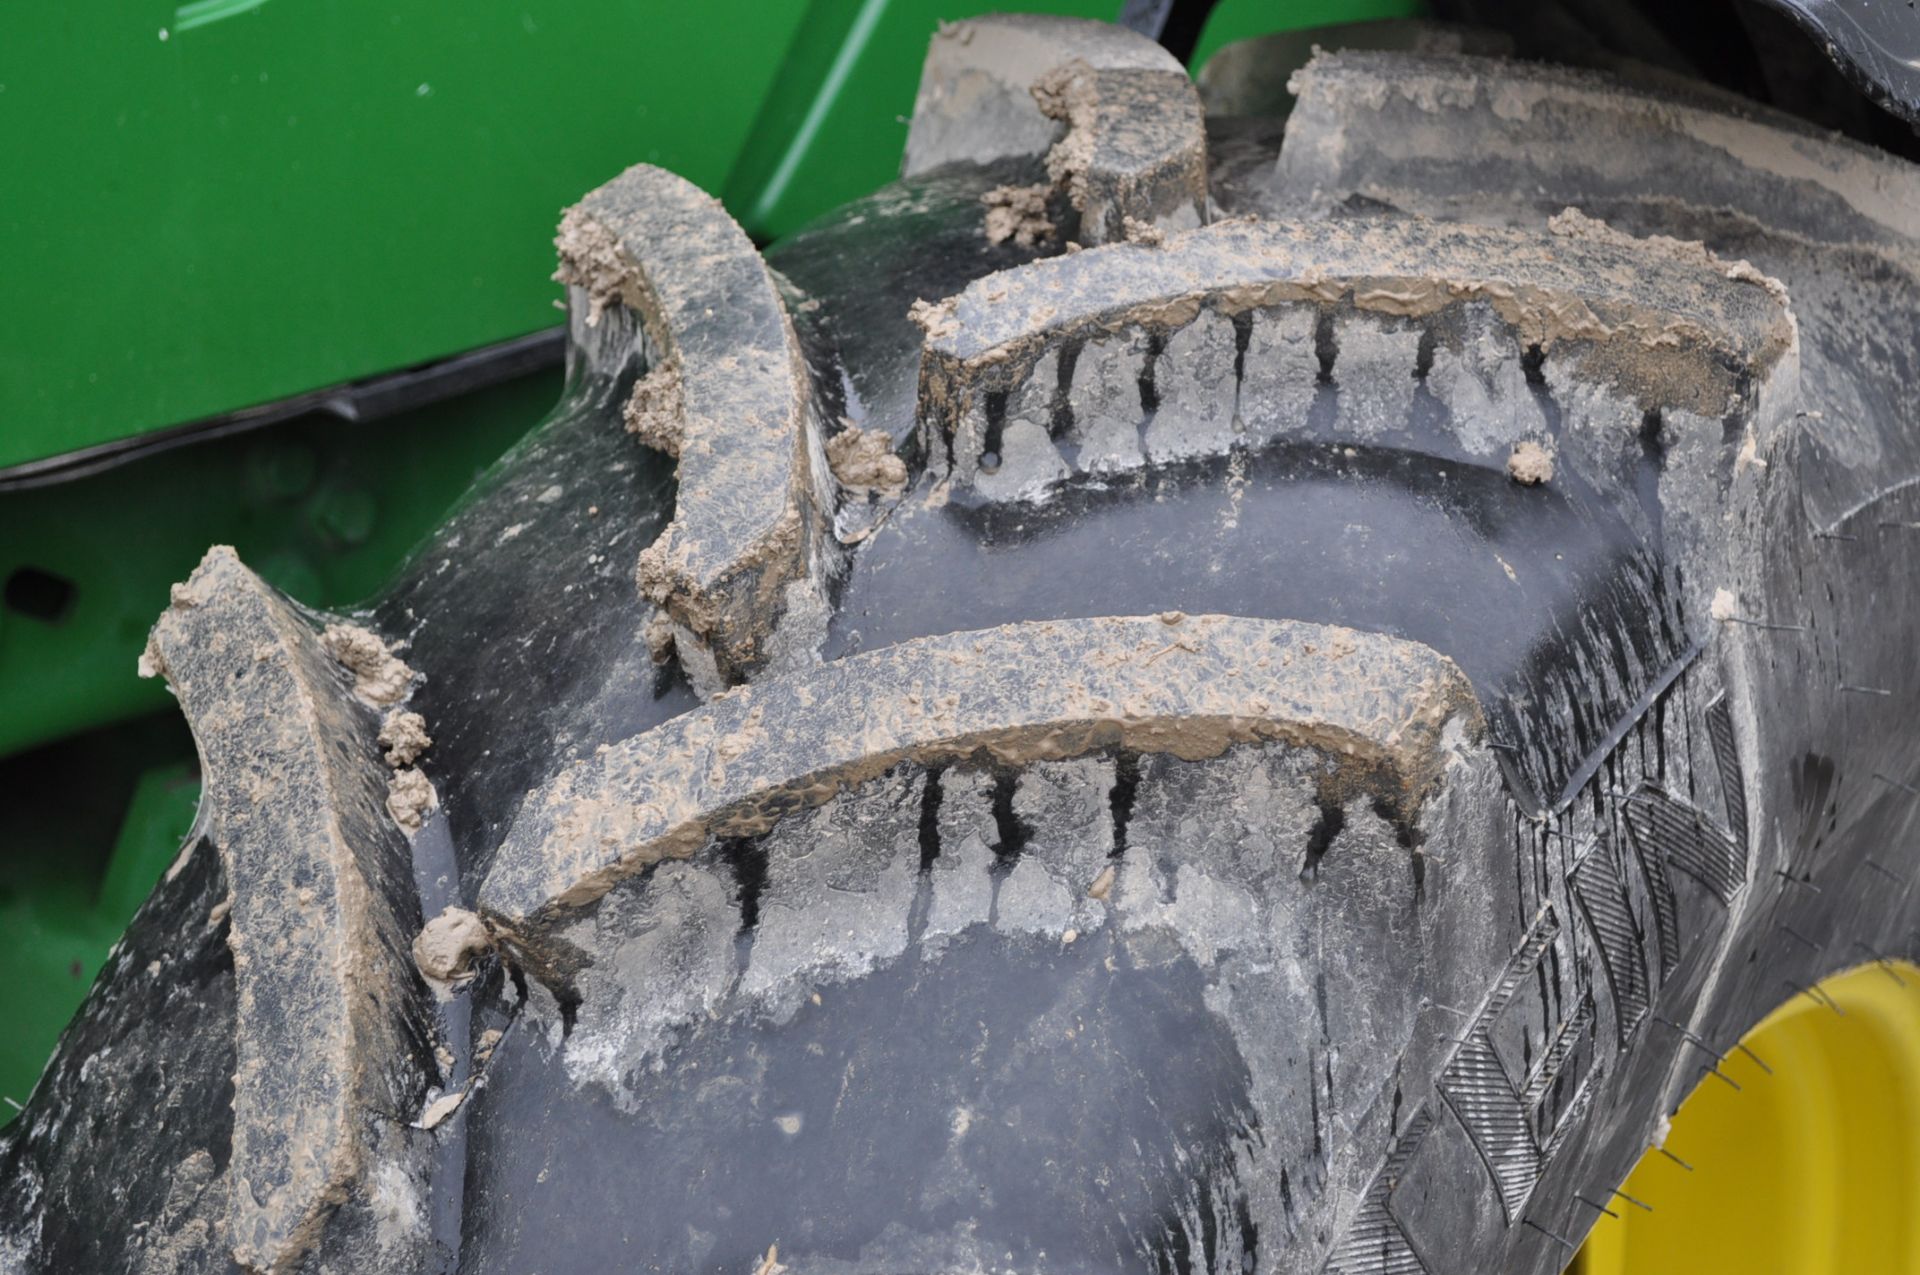 John Deere 6150M tractor, MFWD, C/H/A, 620/85 R 38 rear, 420/85 R 28 front, front fenders, - Image 5 of 20